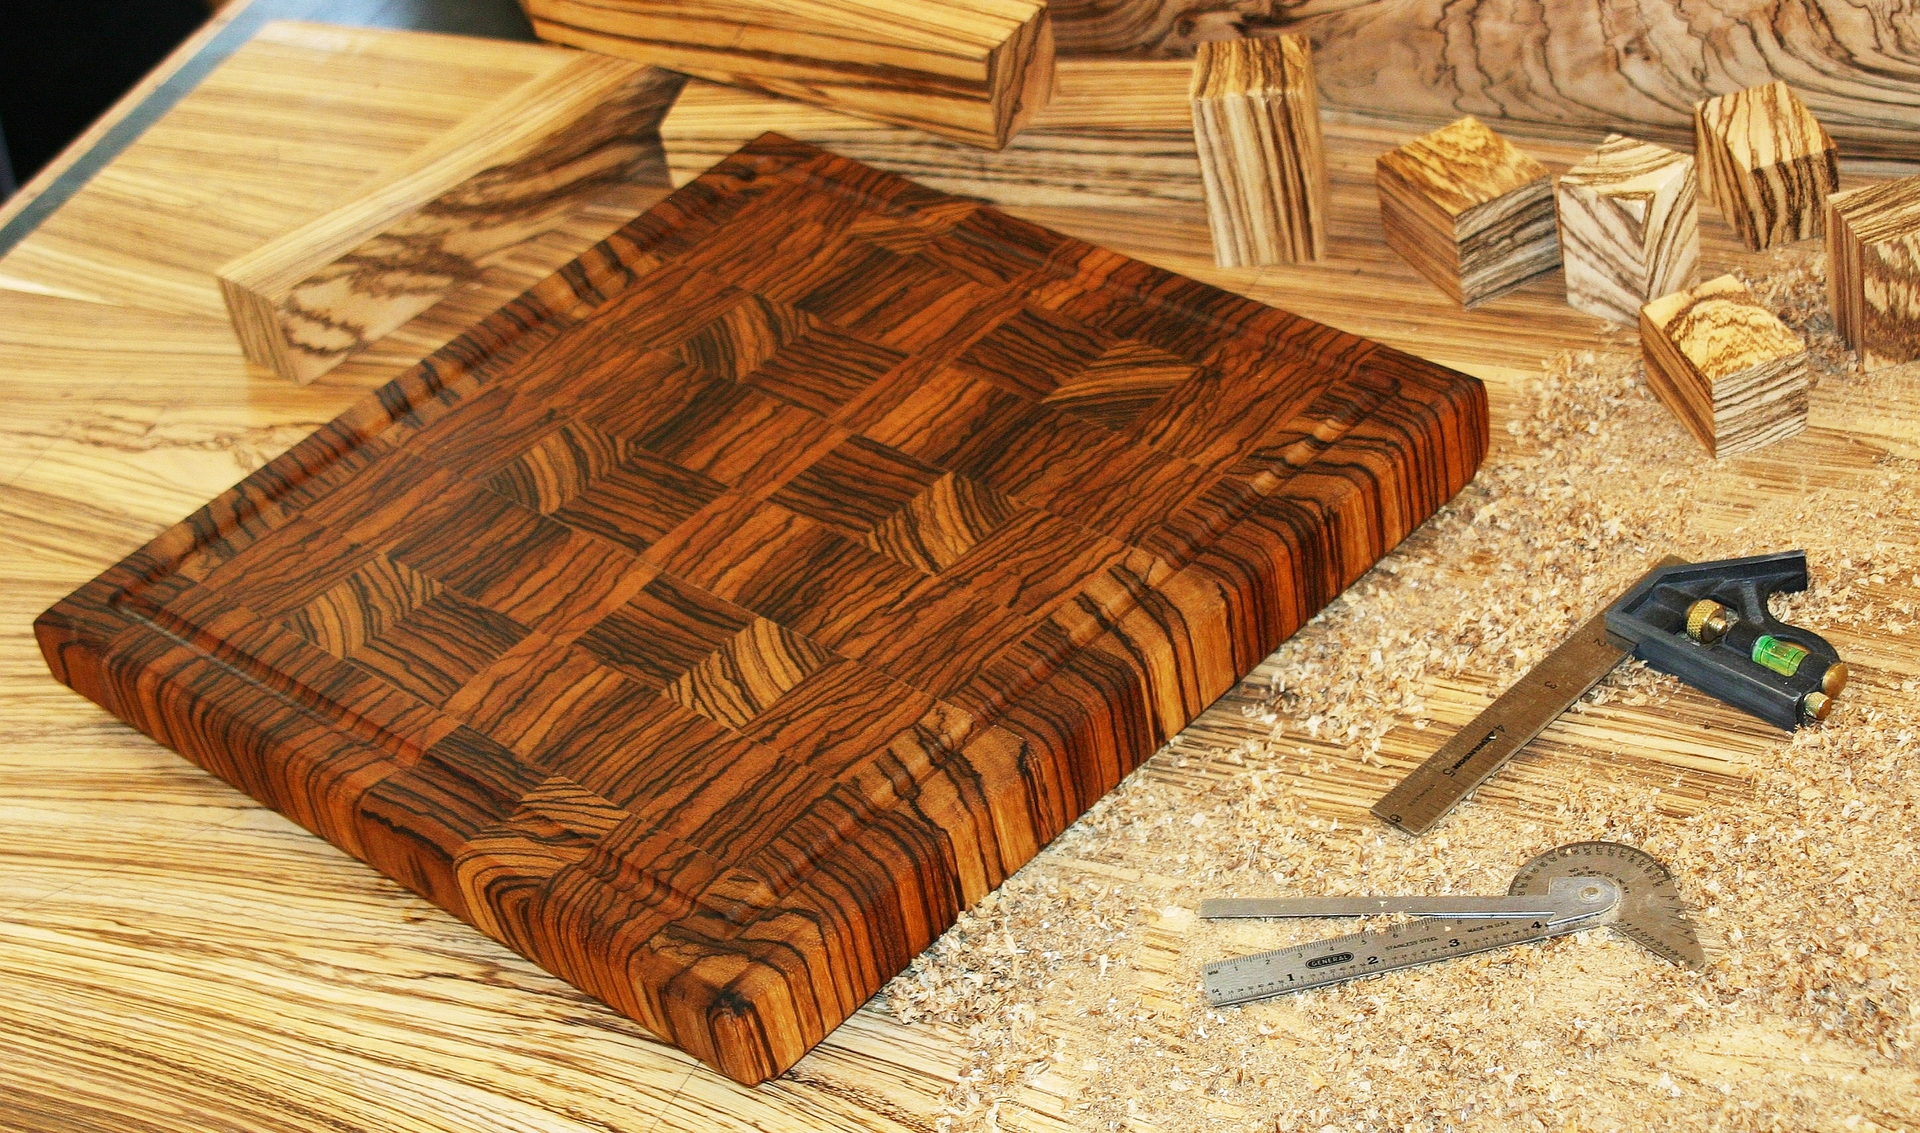 inspiring-ideas-wood-cutting-board-for-meat-wood-cutting-board-maintenance-wood-cutting-board-material-wood-cutting-board-mineral-oil-wood-cutting-board-made-in-usa-wood-cutting-board-manufacture